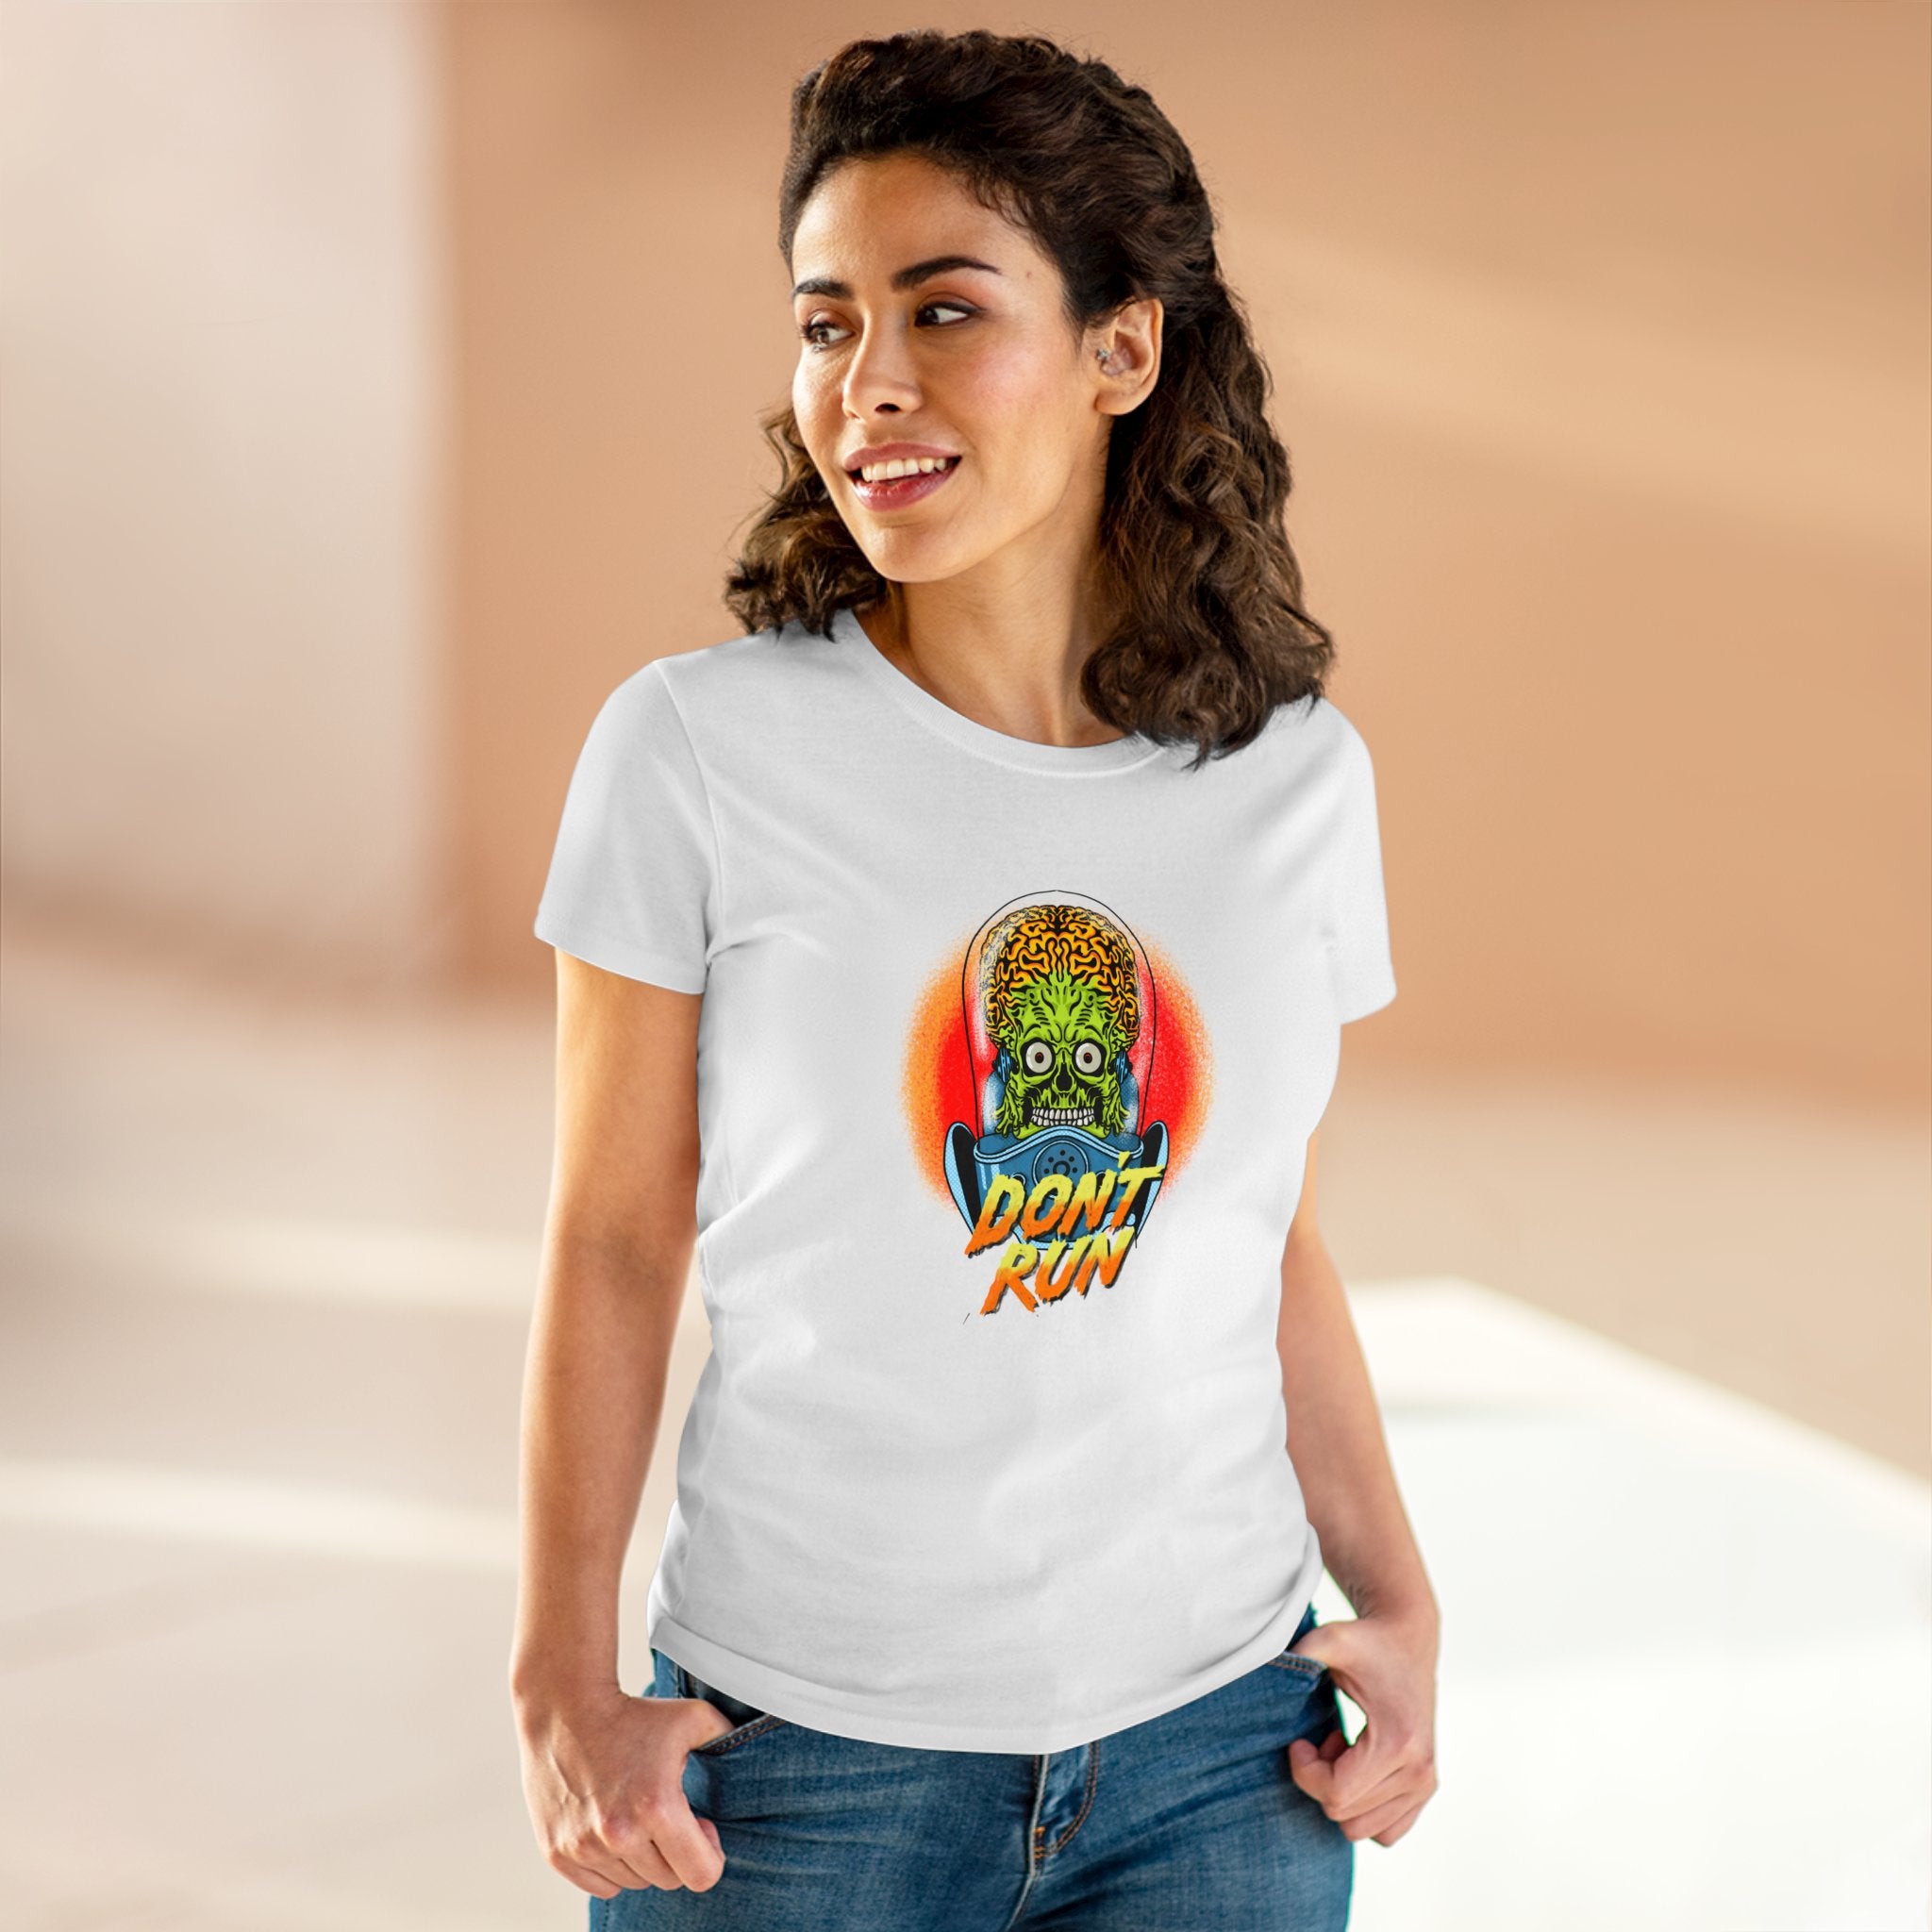 A woman with dark hair wearing the Don't Run - Women's Tee, a white t-shirt made of soft cotton featuring a graphic of an alien head and the text "Don't Run," stands in a well-lit indoor space. The shirt's great fit makes her look effortlessly stylish.